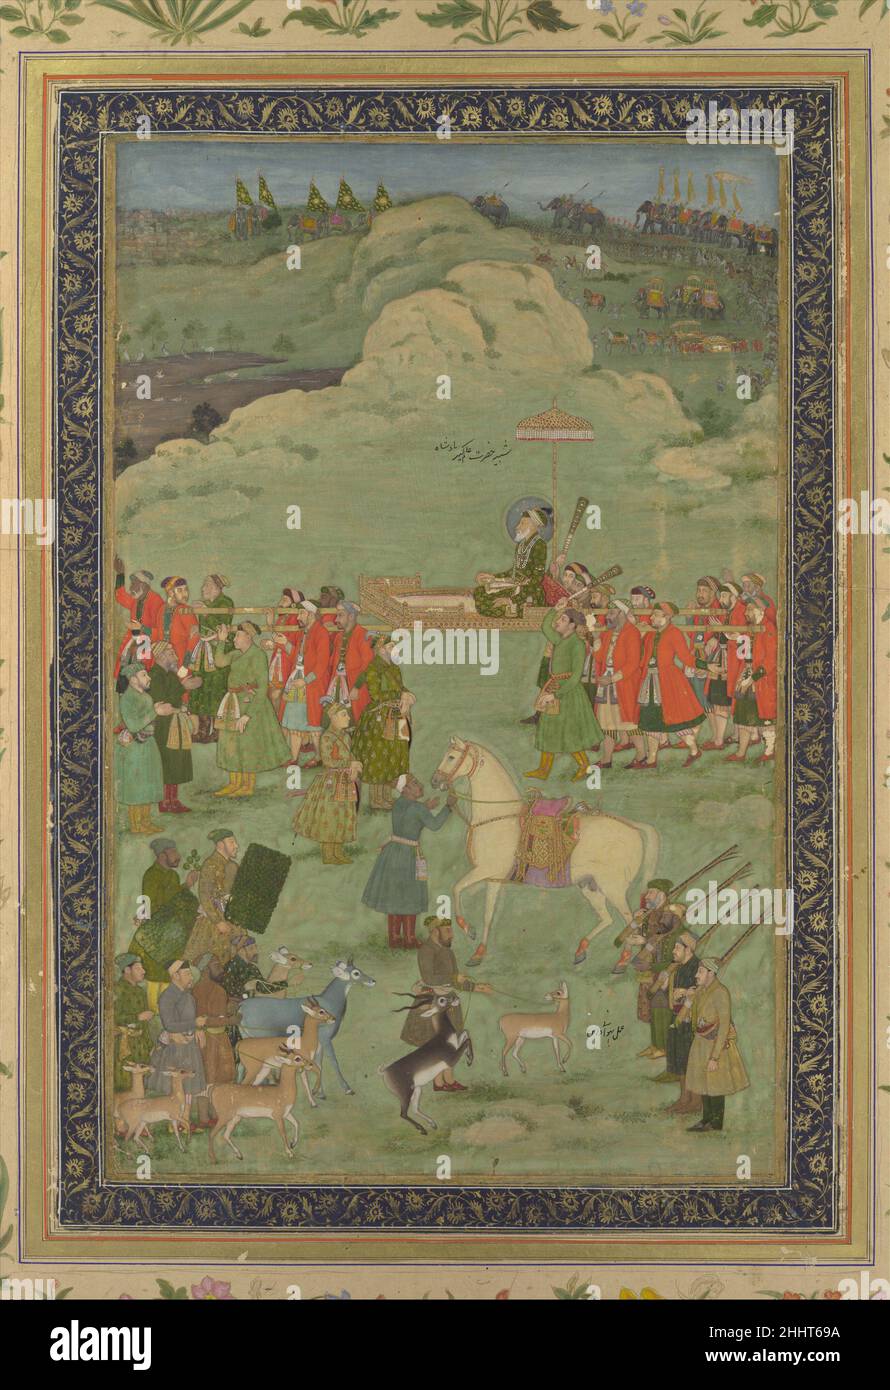 The Emperor Aurangzeb Carried on a Palanquin ca. 1705–20 Painting by Bhavanidas The emperor Aurangzeb (r. 1656–1707) and his royal hunting party are shown here in one of the final grand imperial images of the Mughal era. Preparations for the chase are in progress, as evident from the row of hunters in the foreground and others who lead deer as bait or carry leafy screens for camouflage. Bhavanidas, painter of this scene, worked first at the Mughal court and then later moved to the Rajput court of Kishangarh, where he became its preeminent artist.. The Emperor Aurangzeb Carried on a Palanquin Stock Photo